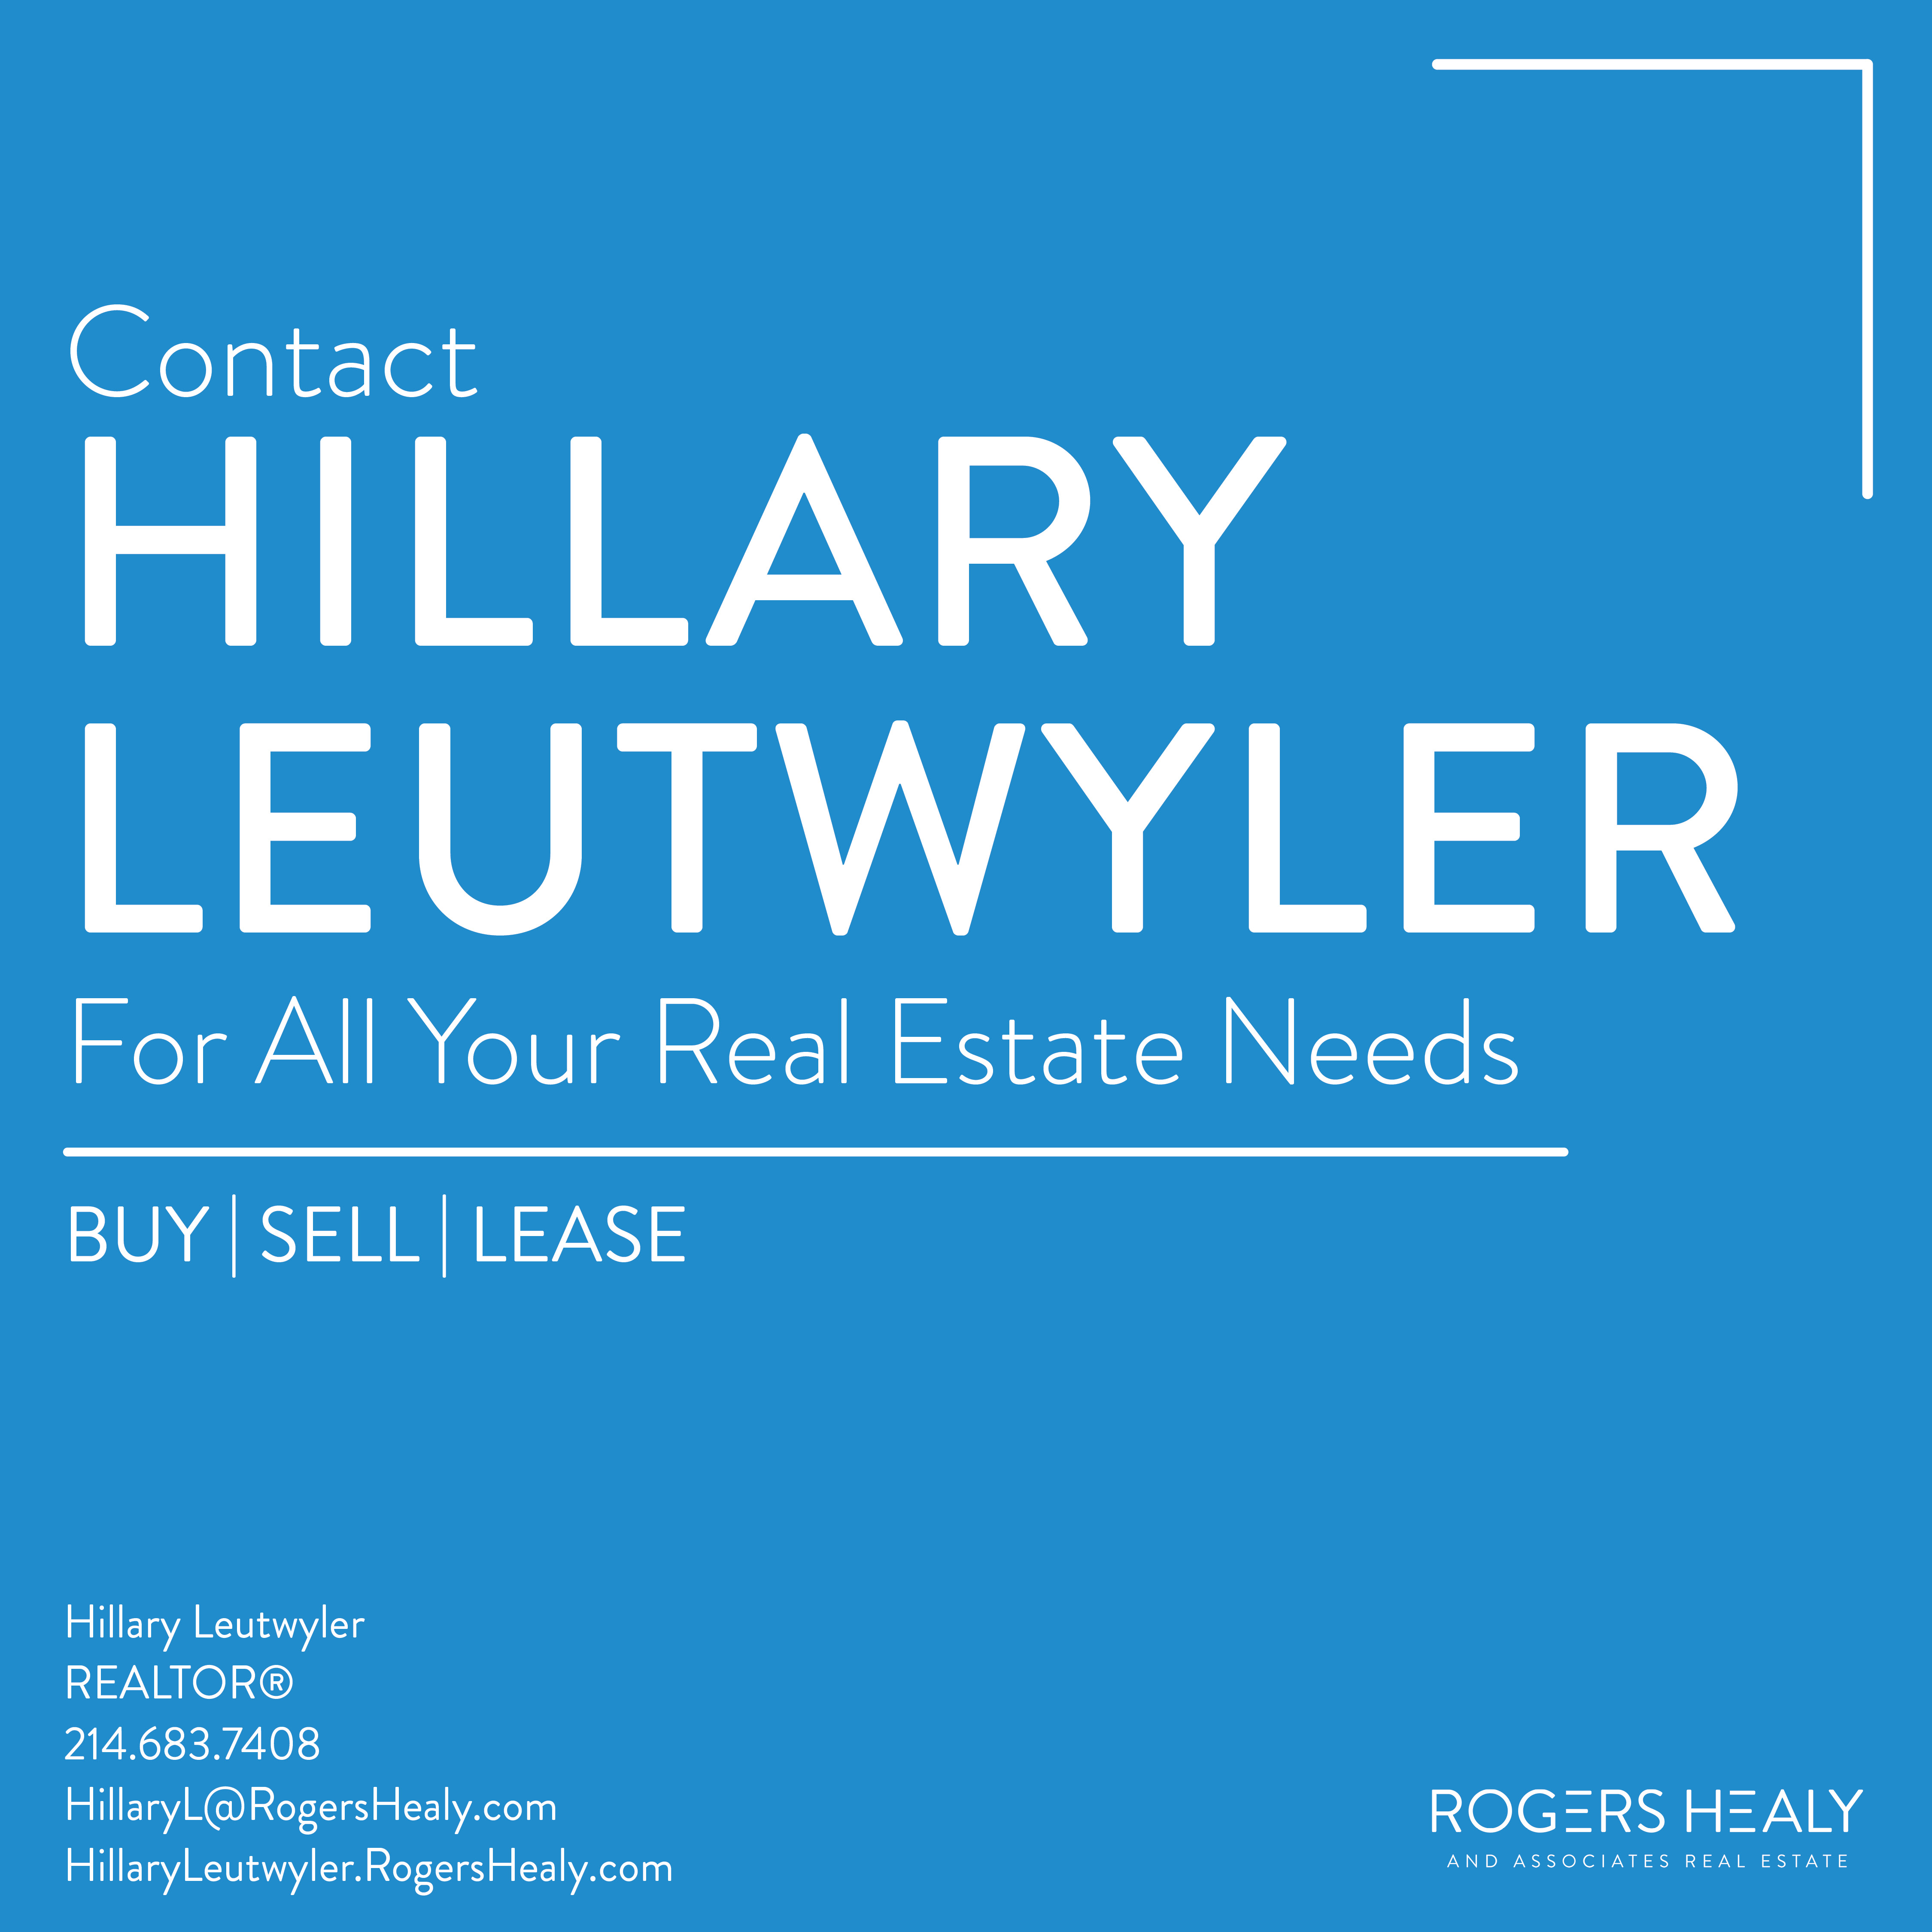 Hillary Leutwyler, real estate agent and Texas REALTORS Director